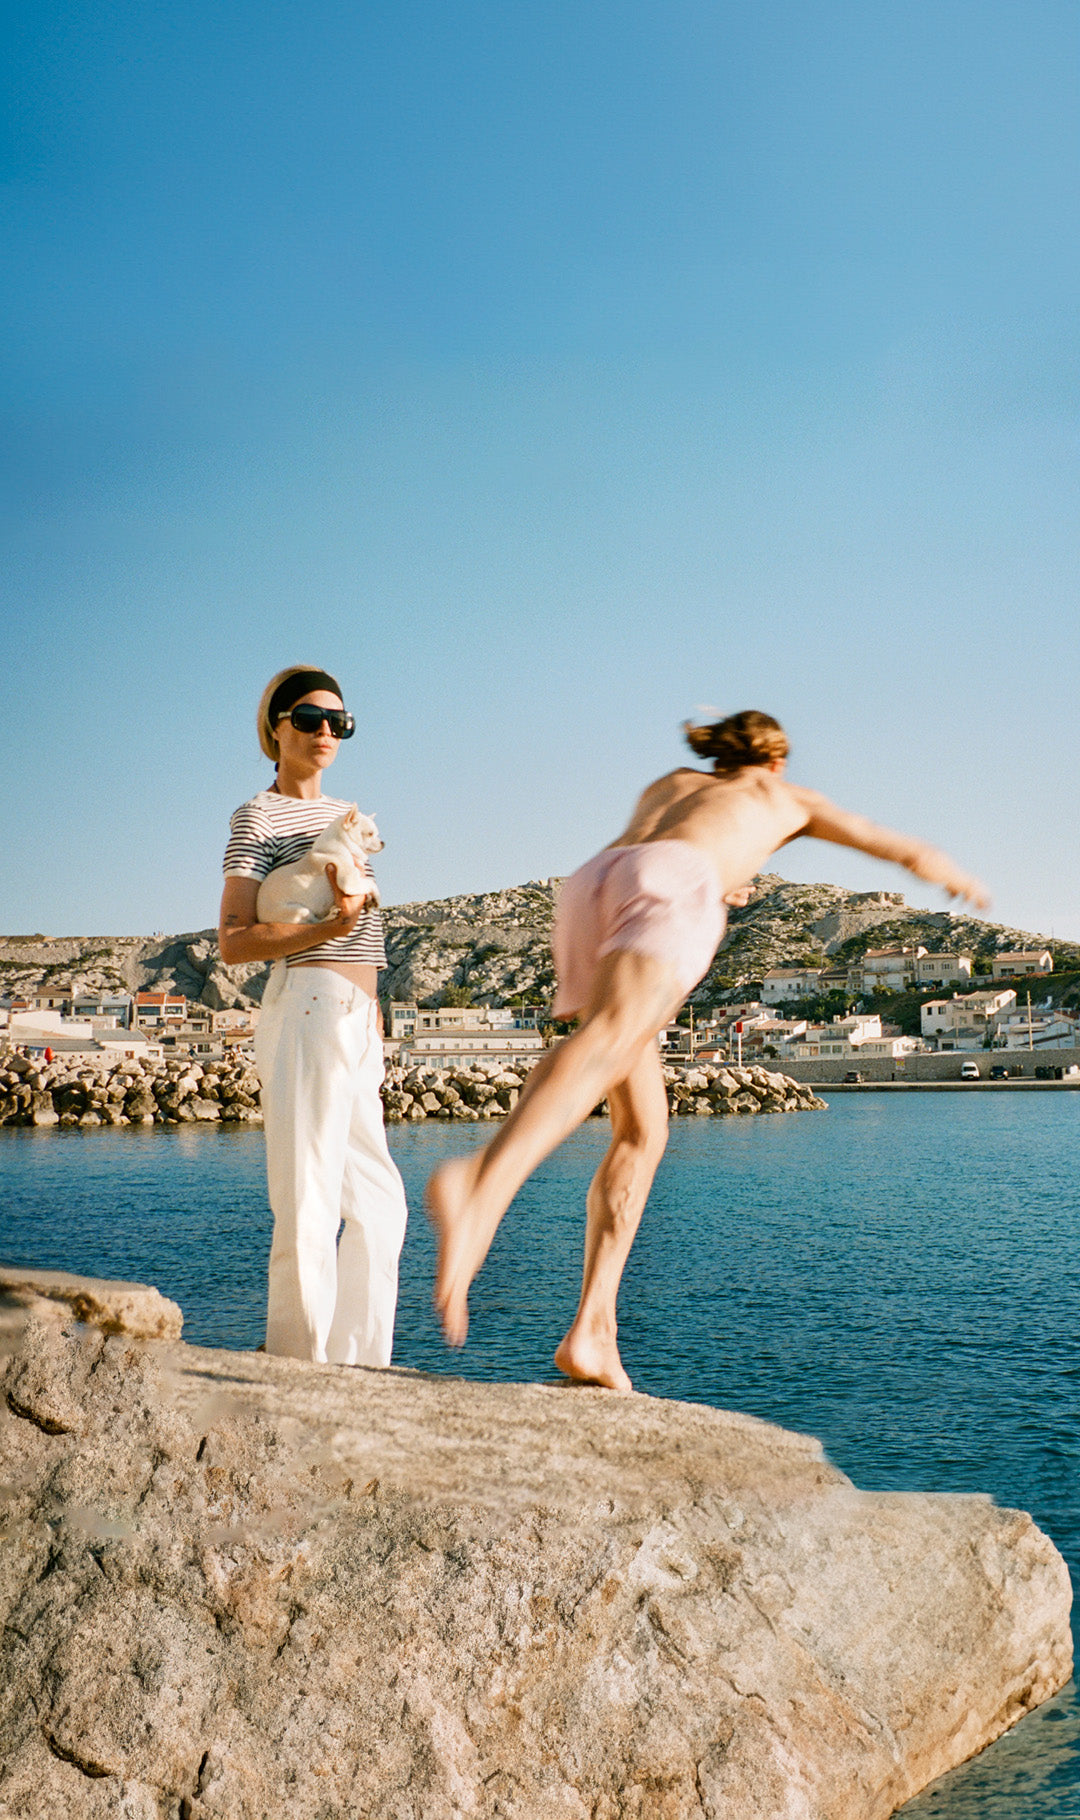 Erin Wasson standing on the rocks in Marseille wearing the Frankie Shop.